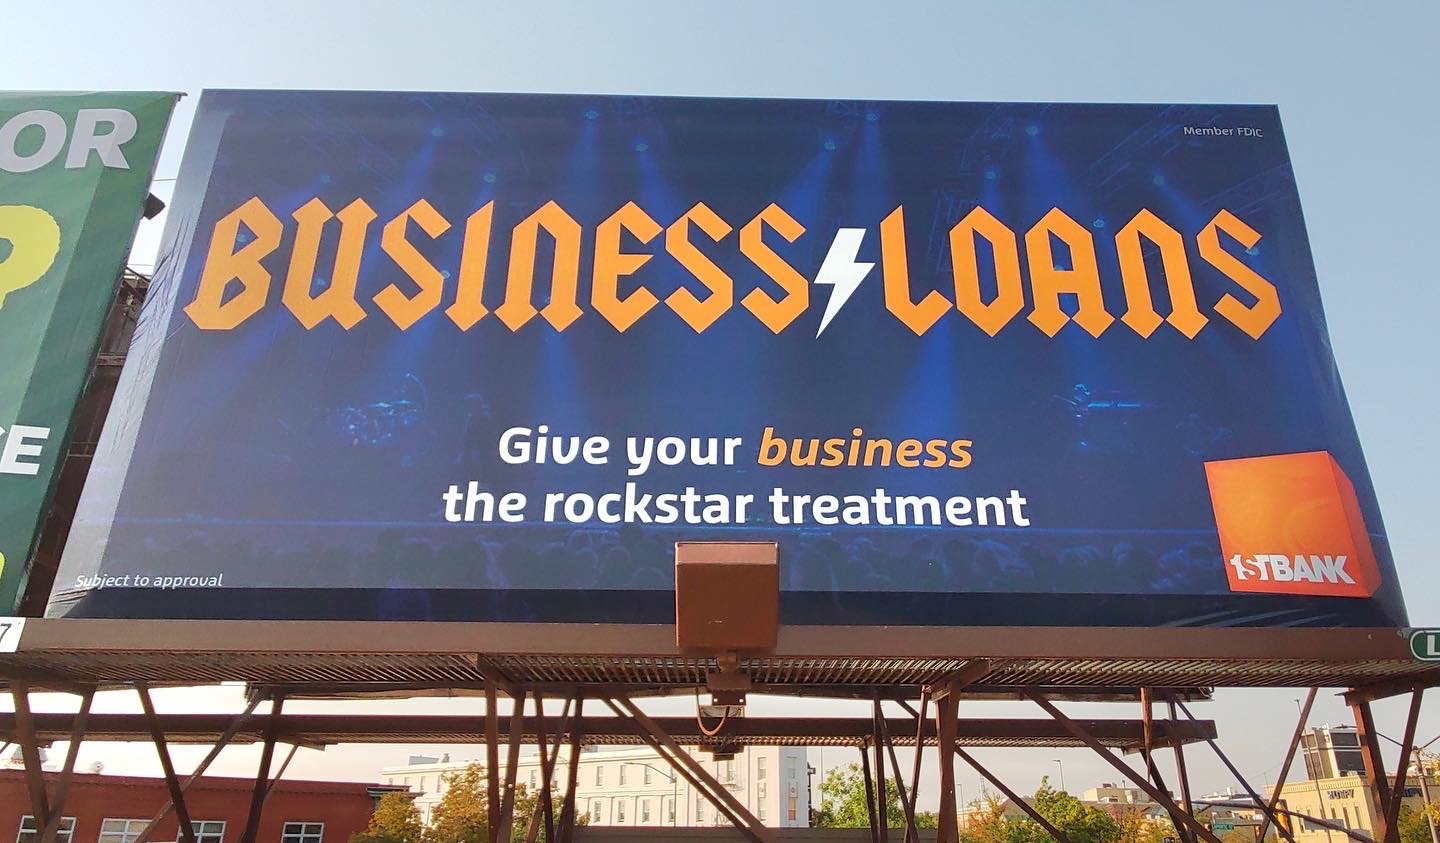 Firstbank CO AZ Rockstar Out of Home Advertising Project X OOH Media Agency+8.JPG